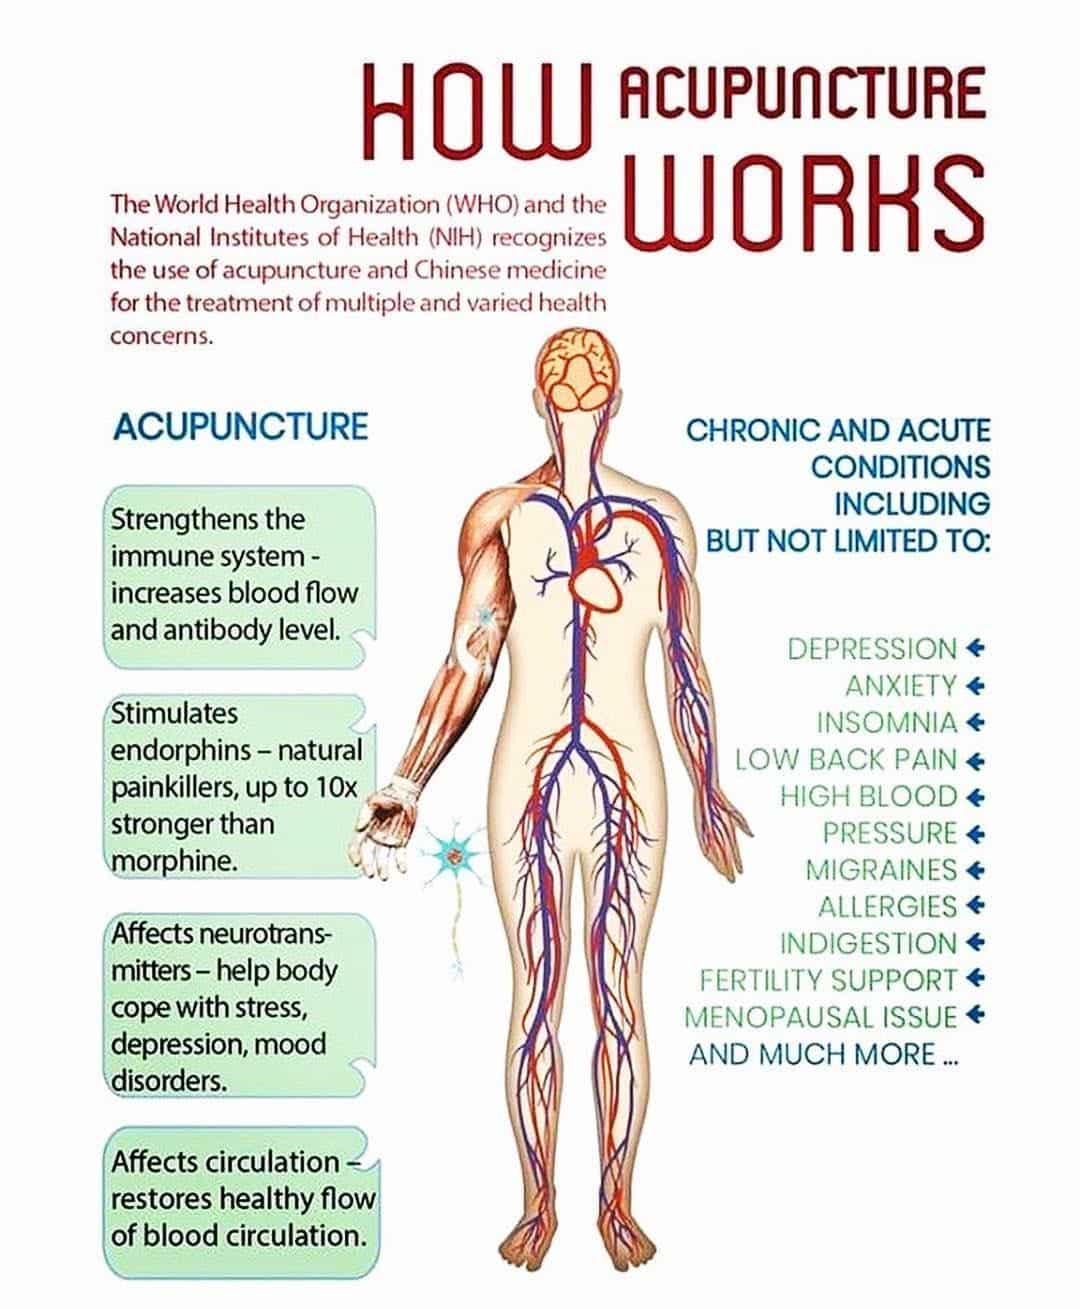 Learn More about Acupuncture